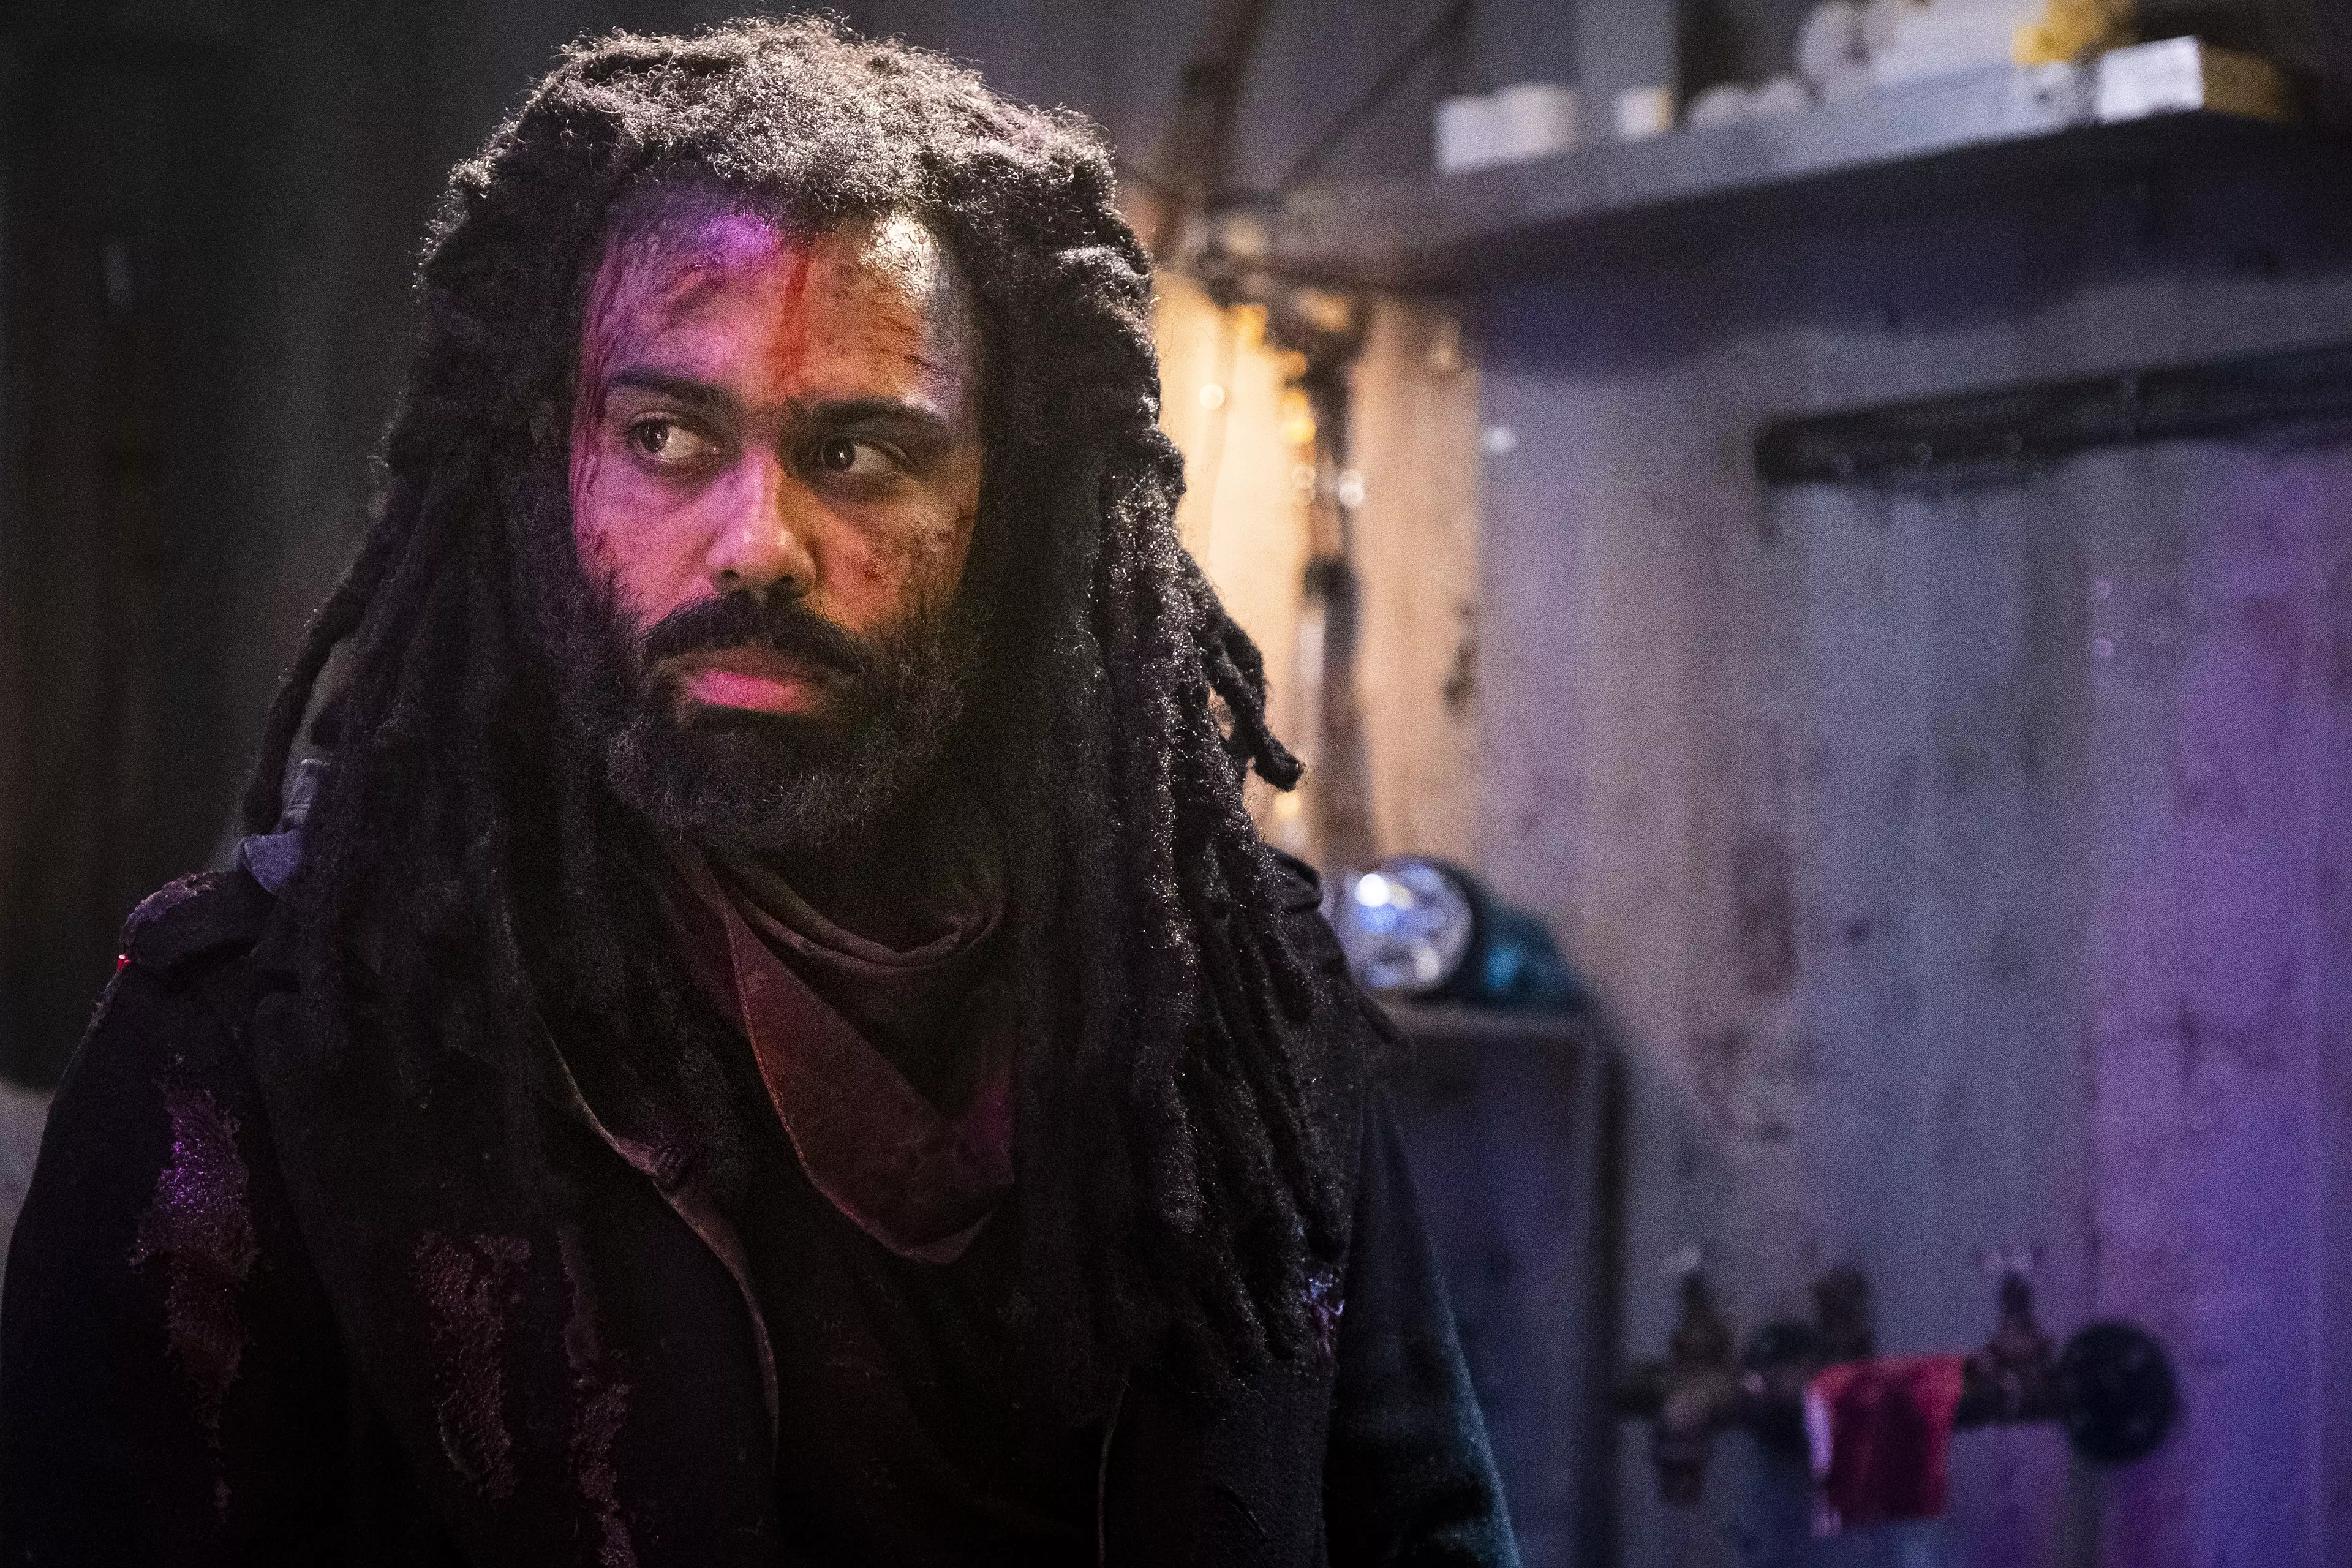 Daveed Diggs stars in the 10-part show (